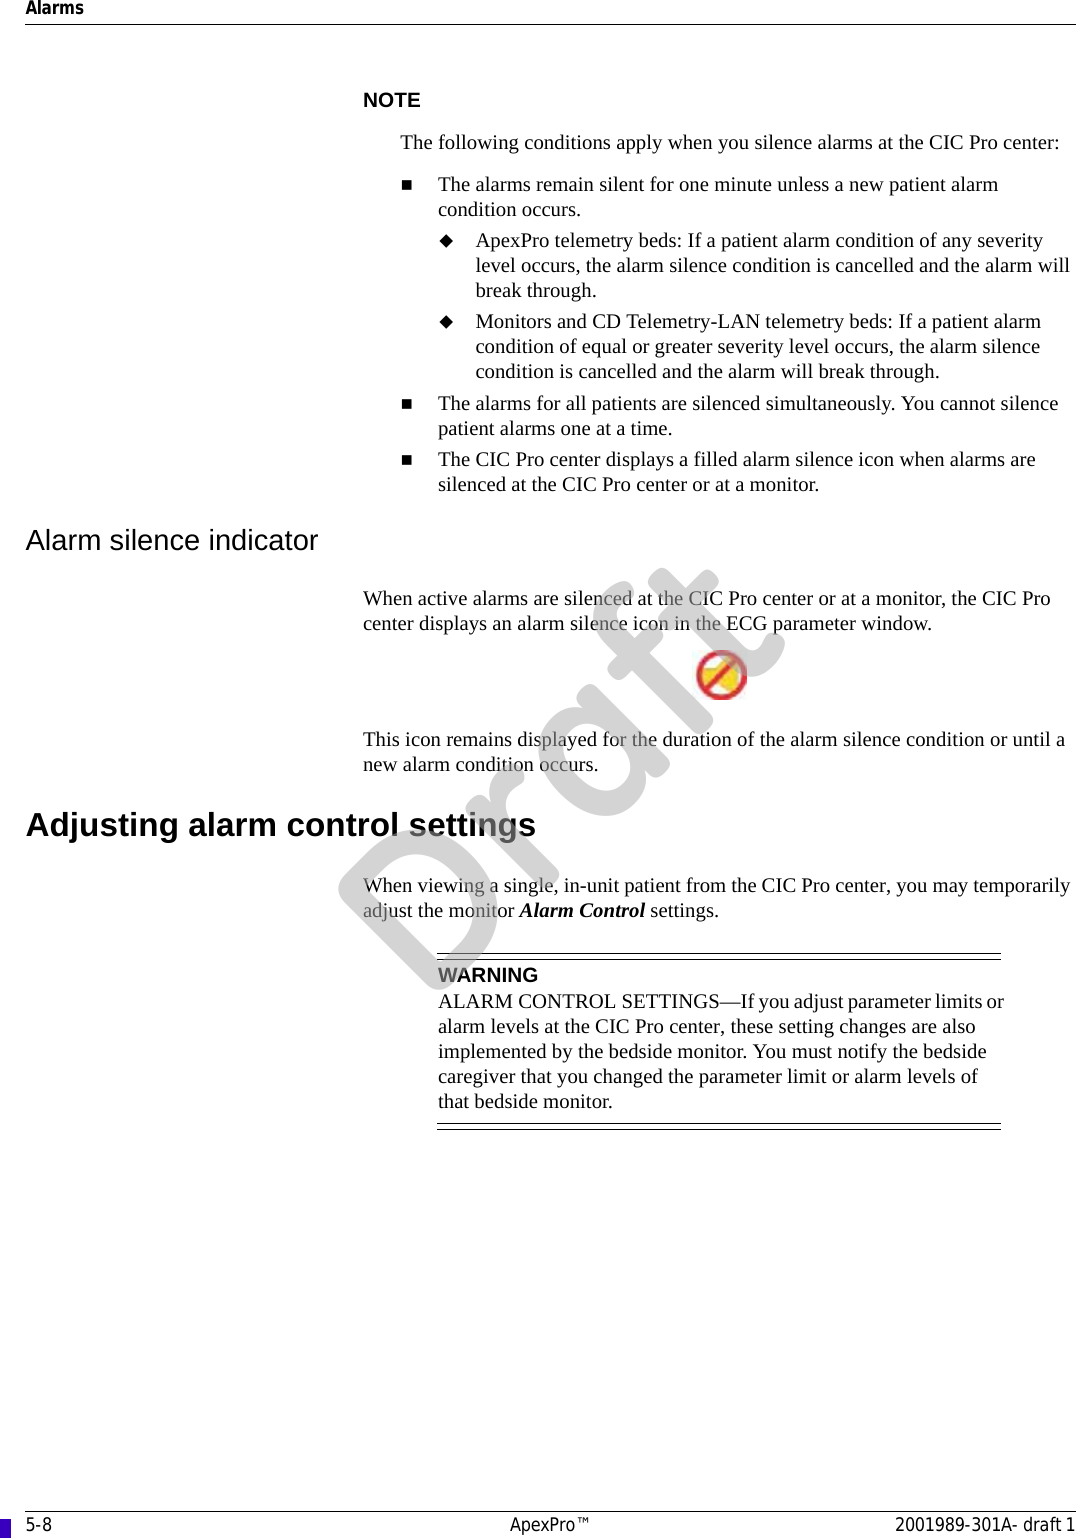 5-8 ApexPro™ 2001989-301A- draft 1AlarmsNOTEThe following conditions apply when you silence alarms at the CIC Pro center:The alarms remain silent for one minute unless a new patient alarm condition occurs. ApexPro telemetry beds: If a patient alarm condition of any severity level occurs, the alarm silence condition is cancelled and the alarm will break through.Monitors and CD Telemetry-LAN telemetry beds: If a patient alarm condition of equal or greater severity level occurs, the alarm silence condition is cancelled and the alarm will break through.The alarms for all patients are silenced simultaneously. You cannot silence patient alarms one at a time.The CIC Pro center displays a filled alarm silence icon when alarms are silenced at the CIC Pro center or at a monitor.Alarm silence indicatorWhen active alarms are silenced at the CIC Pro center or at a monitor, the CIC Pro center displays an alarm silence icon in the ECG parameter window. This icon remains displayed for the duration of the alarm silence condition or until a new alarm condition occurs.Adjusting alarm control settingsWhen viewing a single, in-unit patient from the CIC Pro center, you may temporarily adjust the monitor Alarm Control settings.WARNINGALARM CONTROL SETTINGS—If you adjust parameter limits or alarm levels at the CIC Pro center, these setting changes are also implemented by the bedside monitor. You must notify the bedside caregiver that you changed the parameter limit or alarm levels of that bedside monitor.Draft